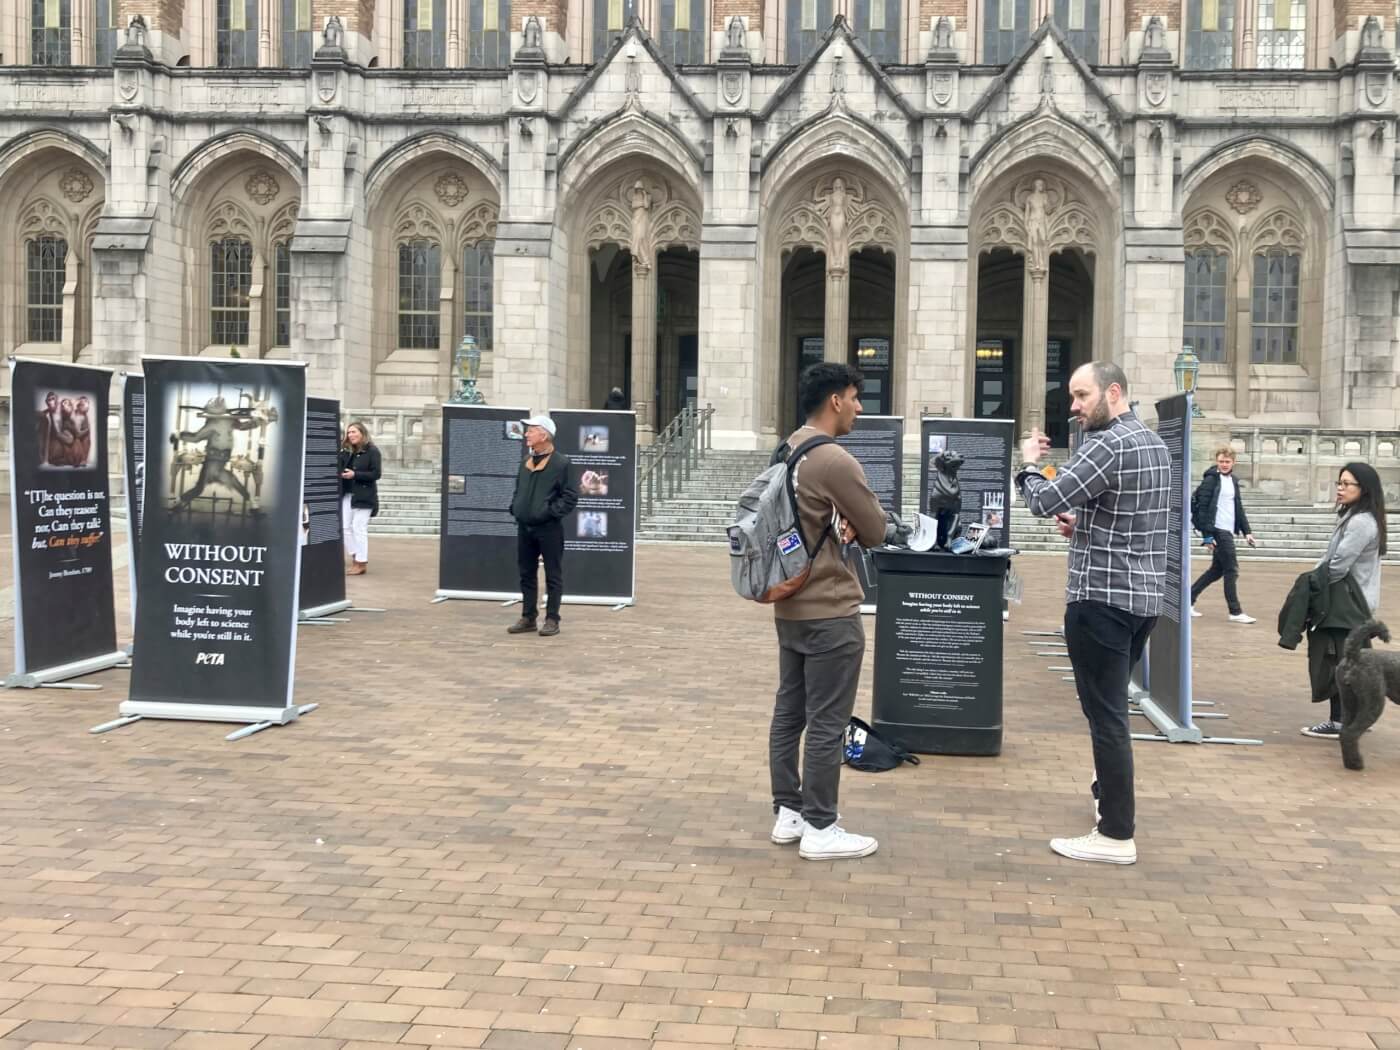 Photo of University of Washington's "Without Consent" exhibit. Photo is taken from outside a building. Various people are looking at the banner displays.